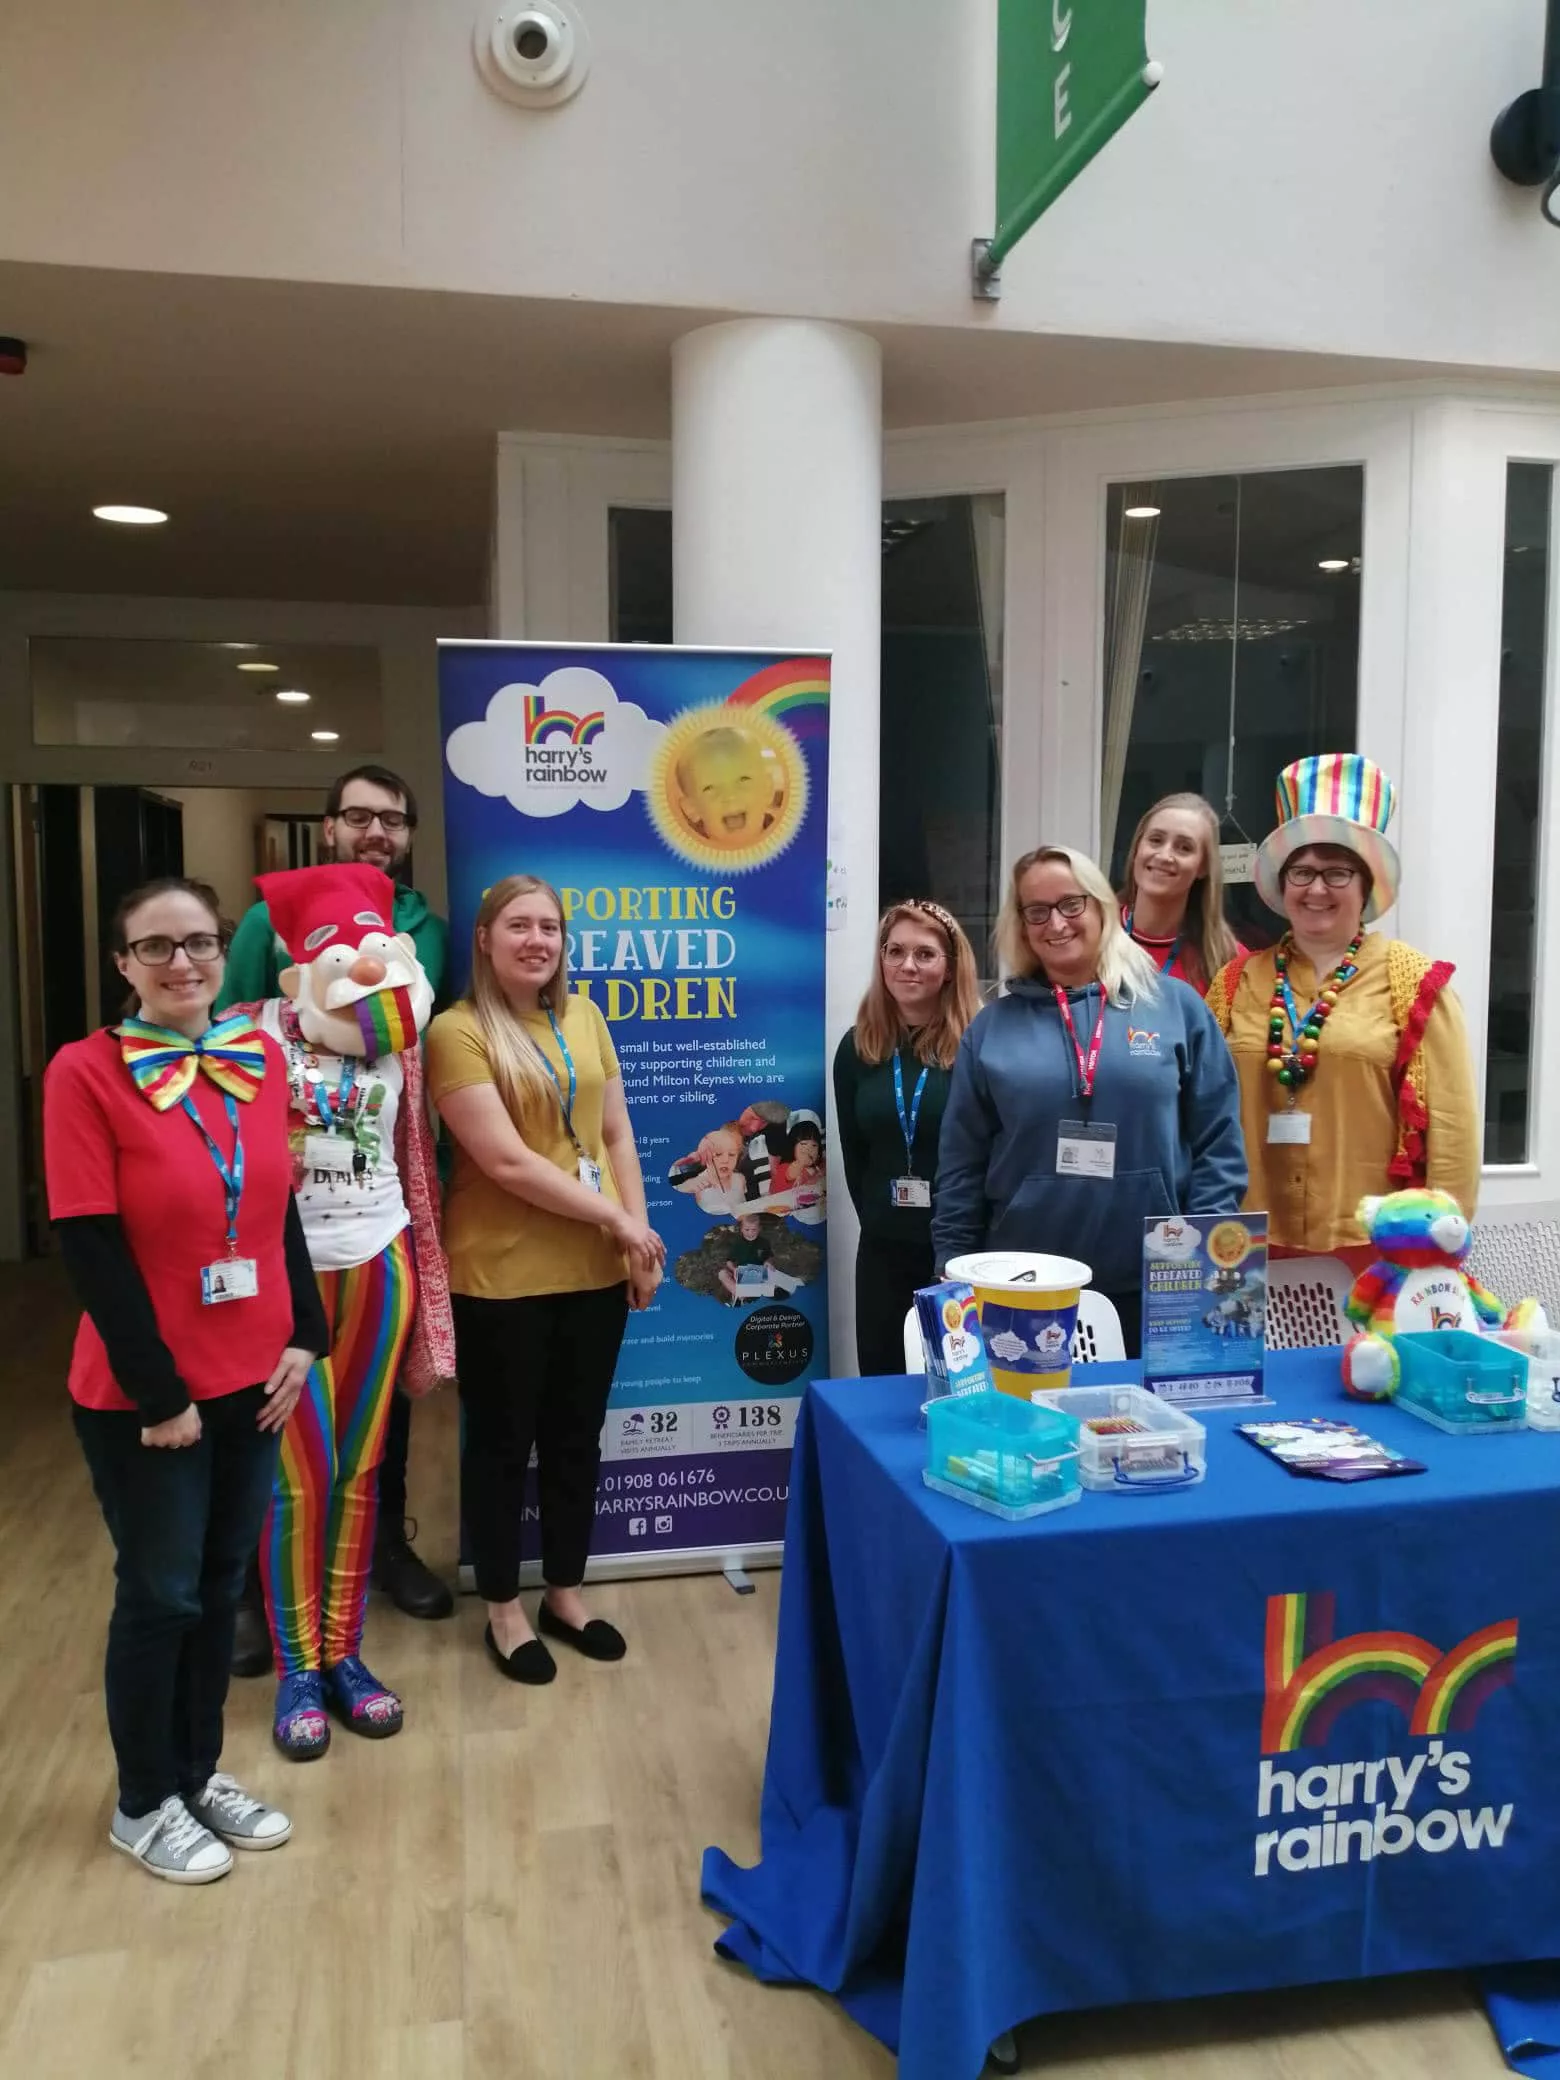 MK College and Harry’s Rainbow team up to support bereaved children this Christmas